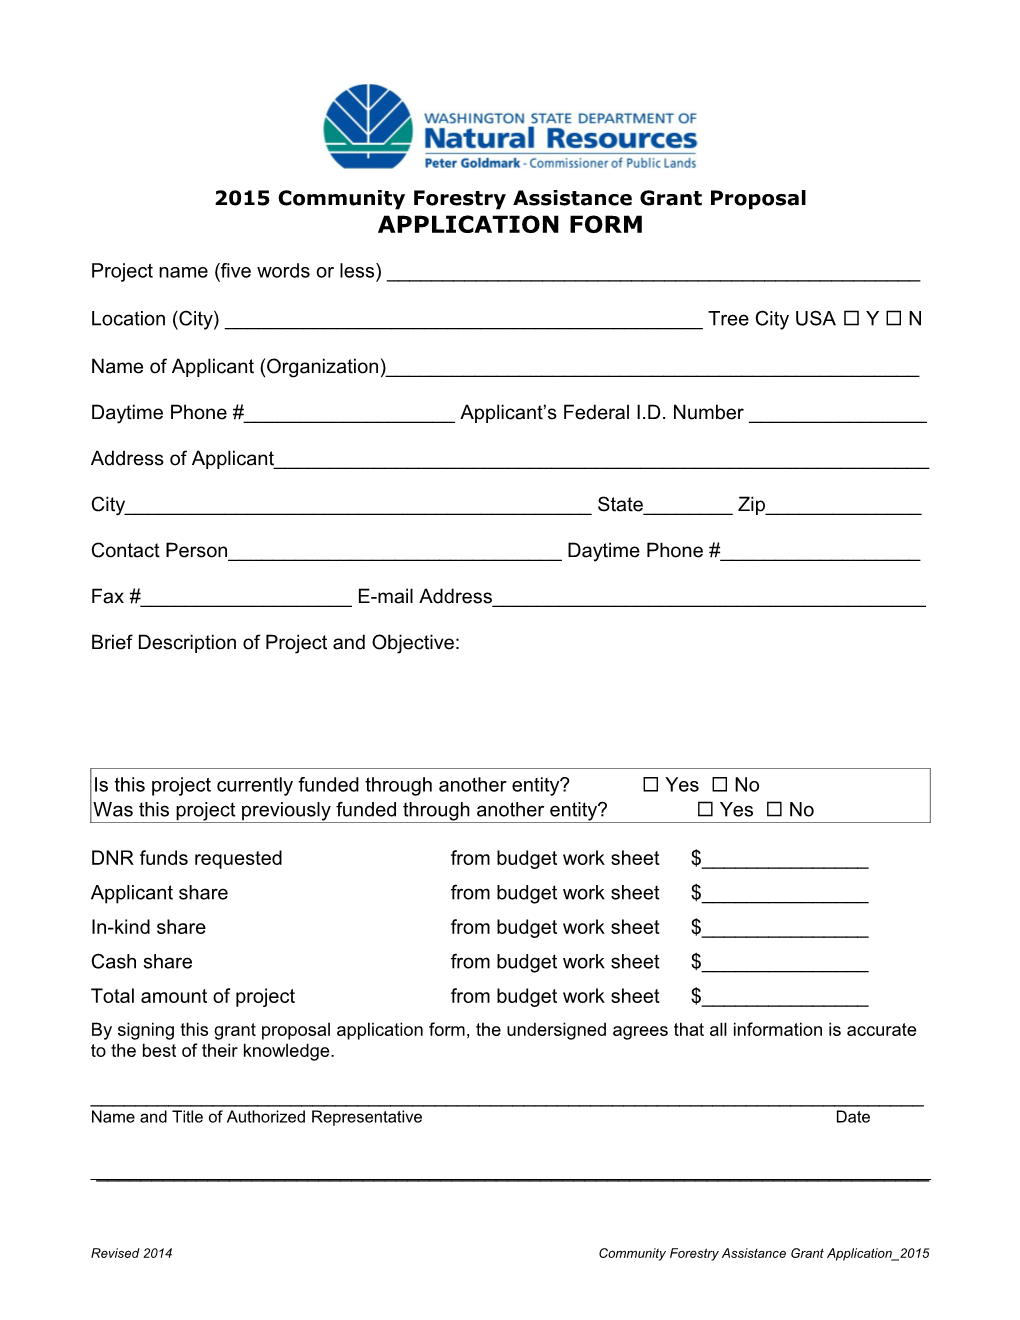 Community Forestry Assistance Grant Application